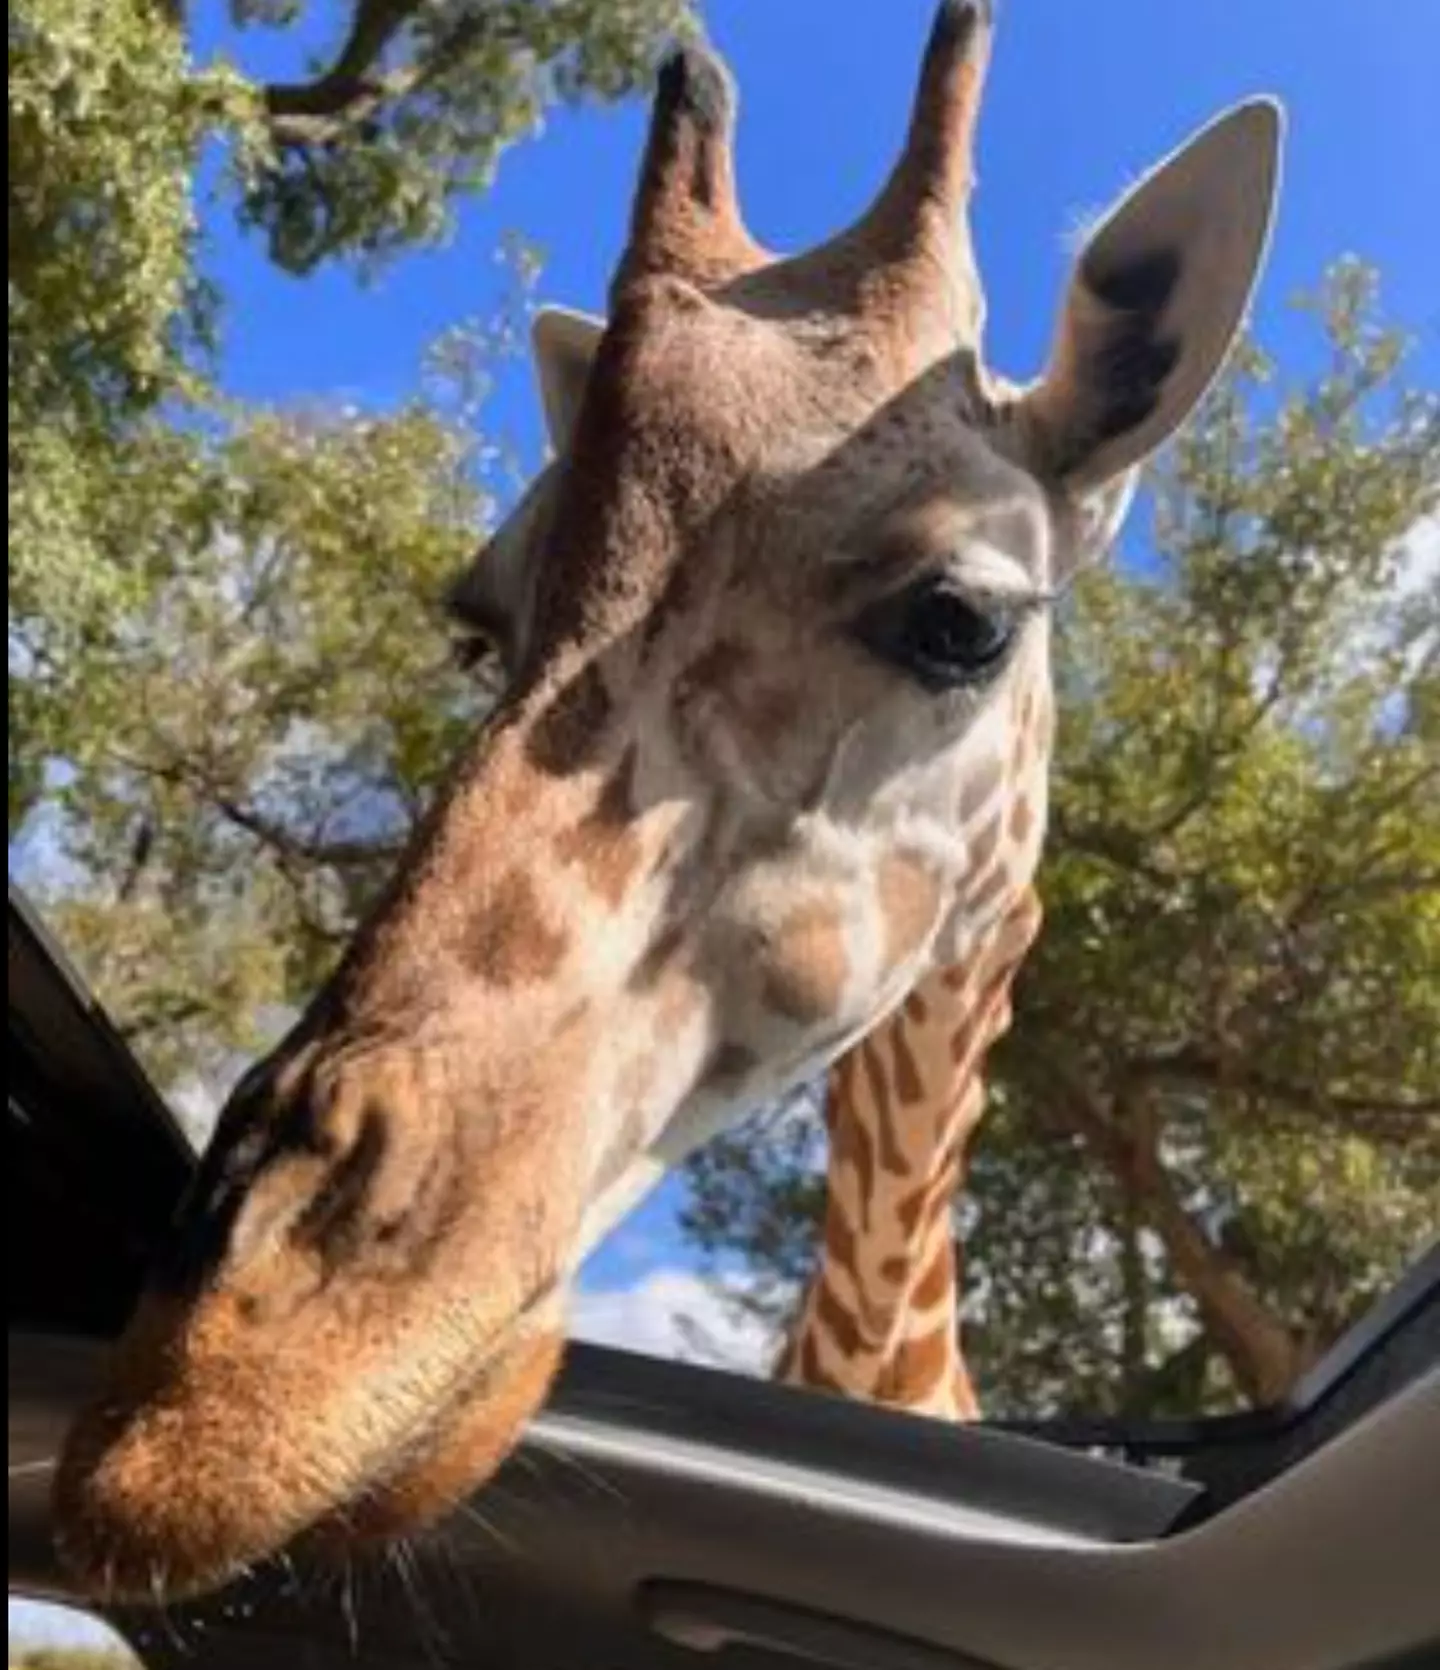 The wildlife center is home to a whole host of animals including cheetahs, Emus, Zebra, European red dear as well as giraffes.